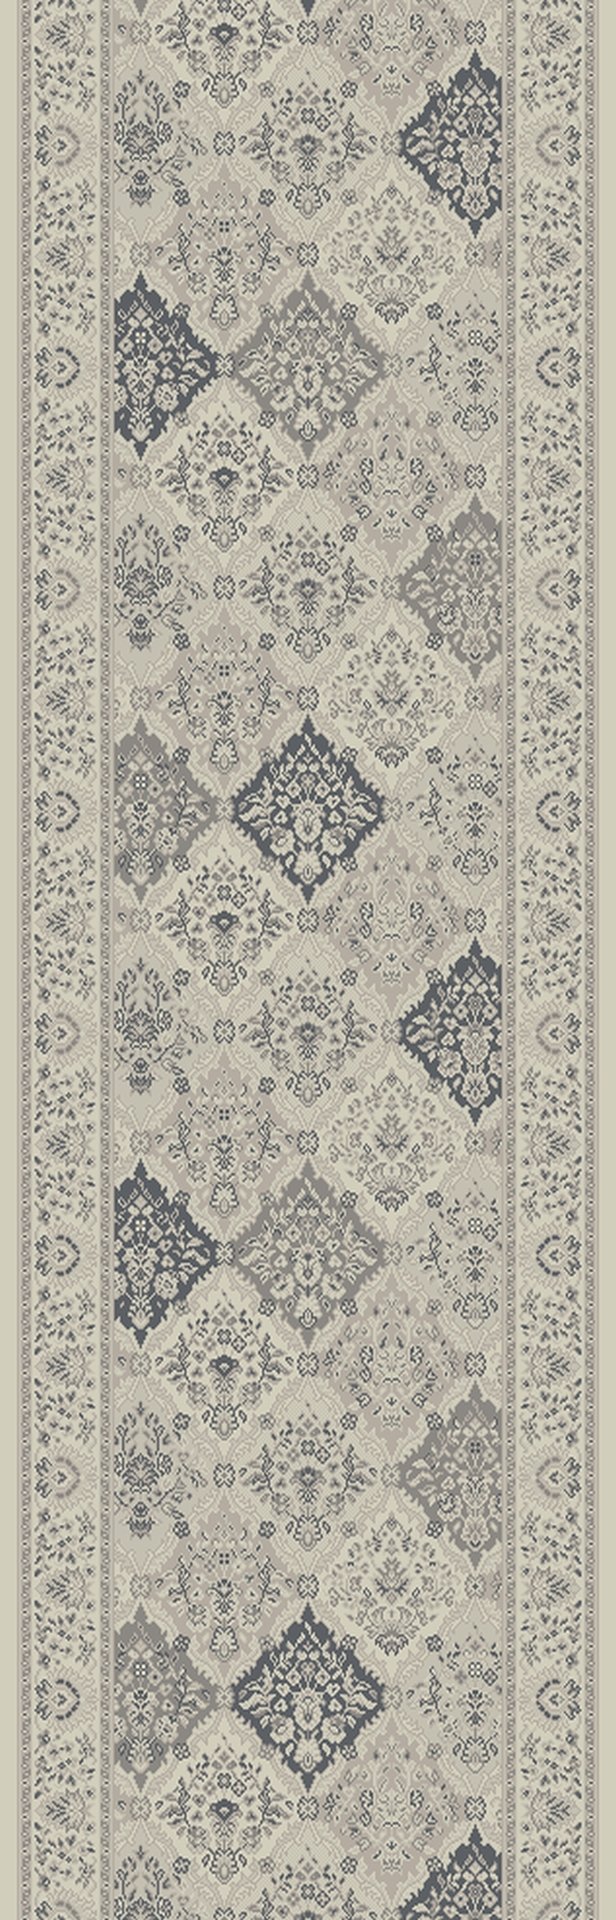 Kashan Ivory-Grey Stair Runners 2782 By Rug Depot 8 Sizes Nashua